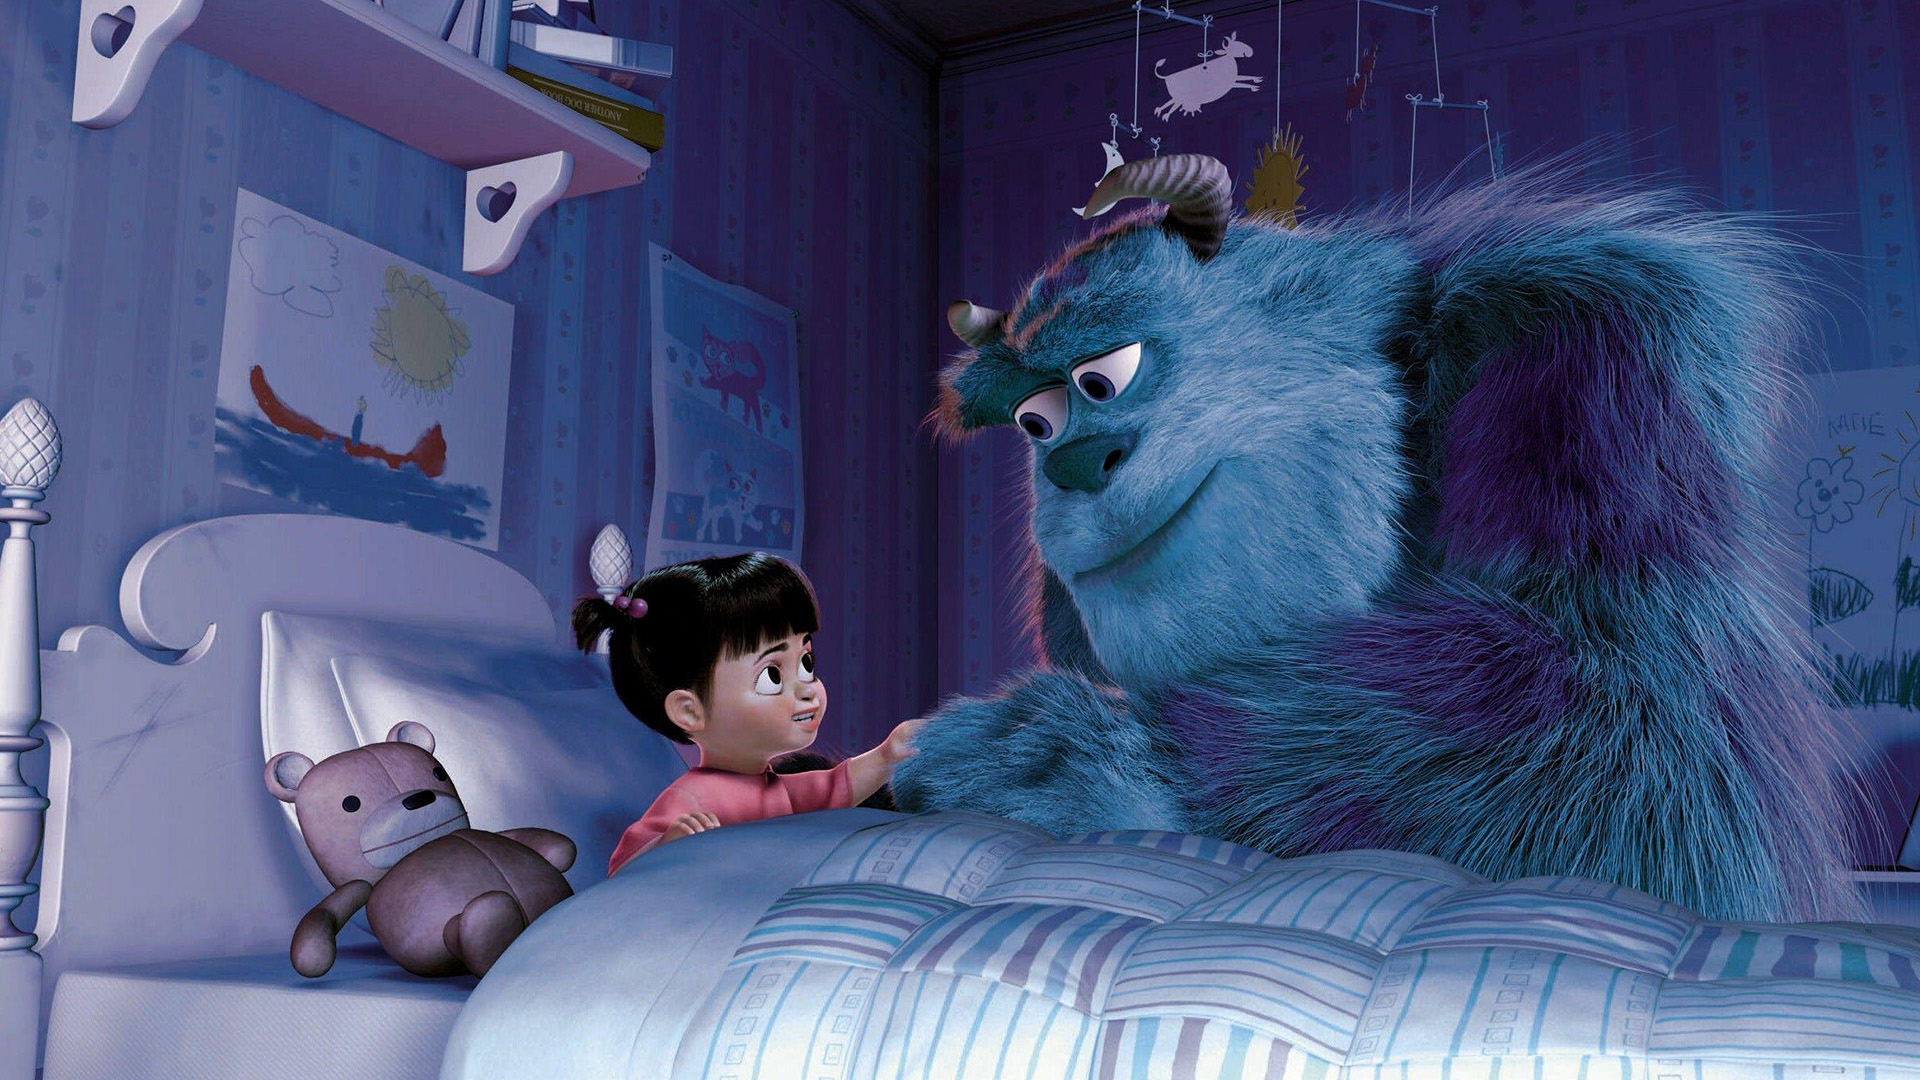 Sulley in Monsters Inc leans over the bed of a child